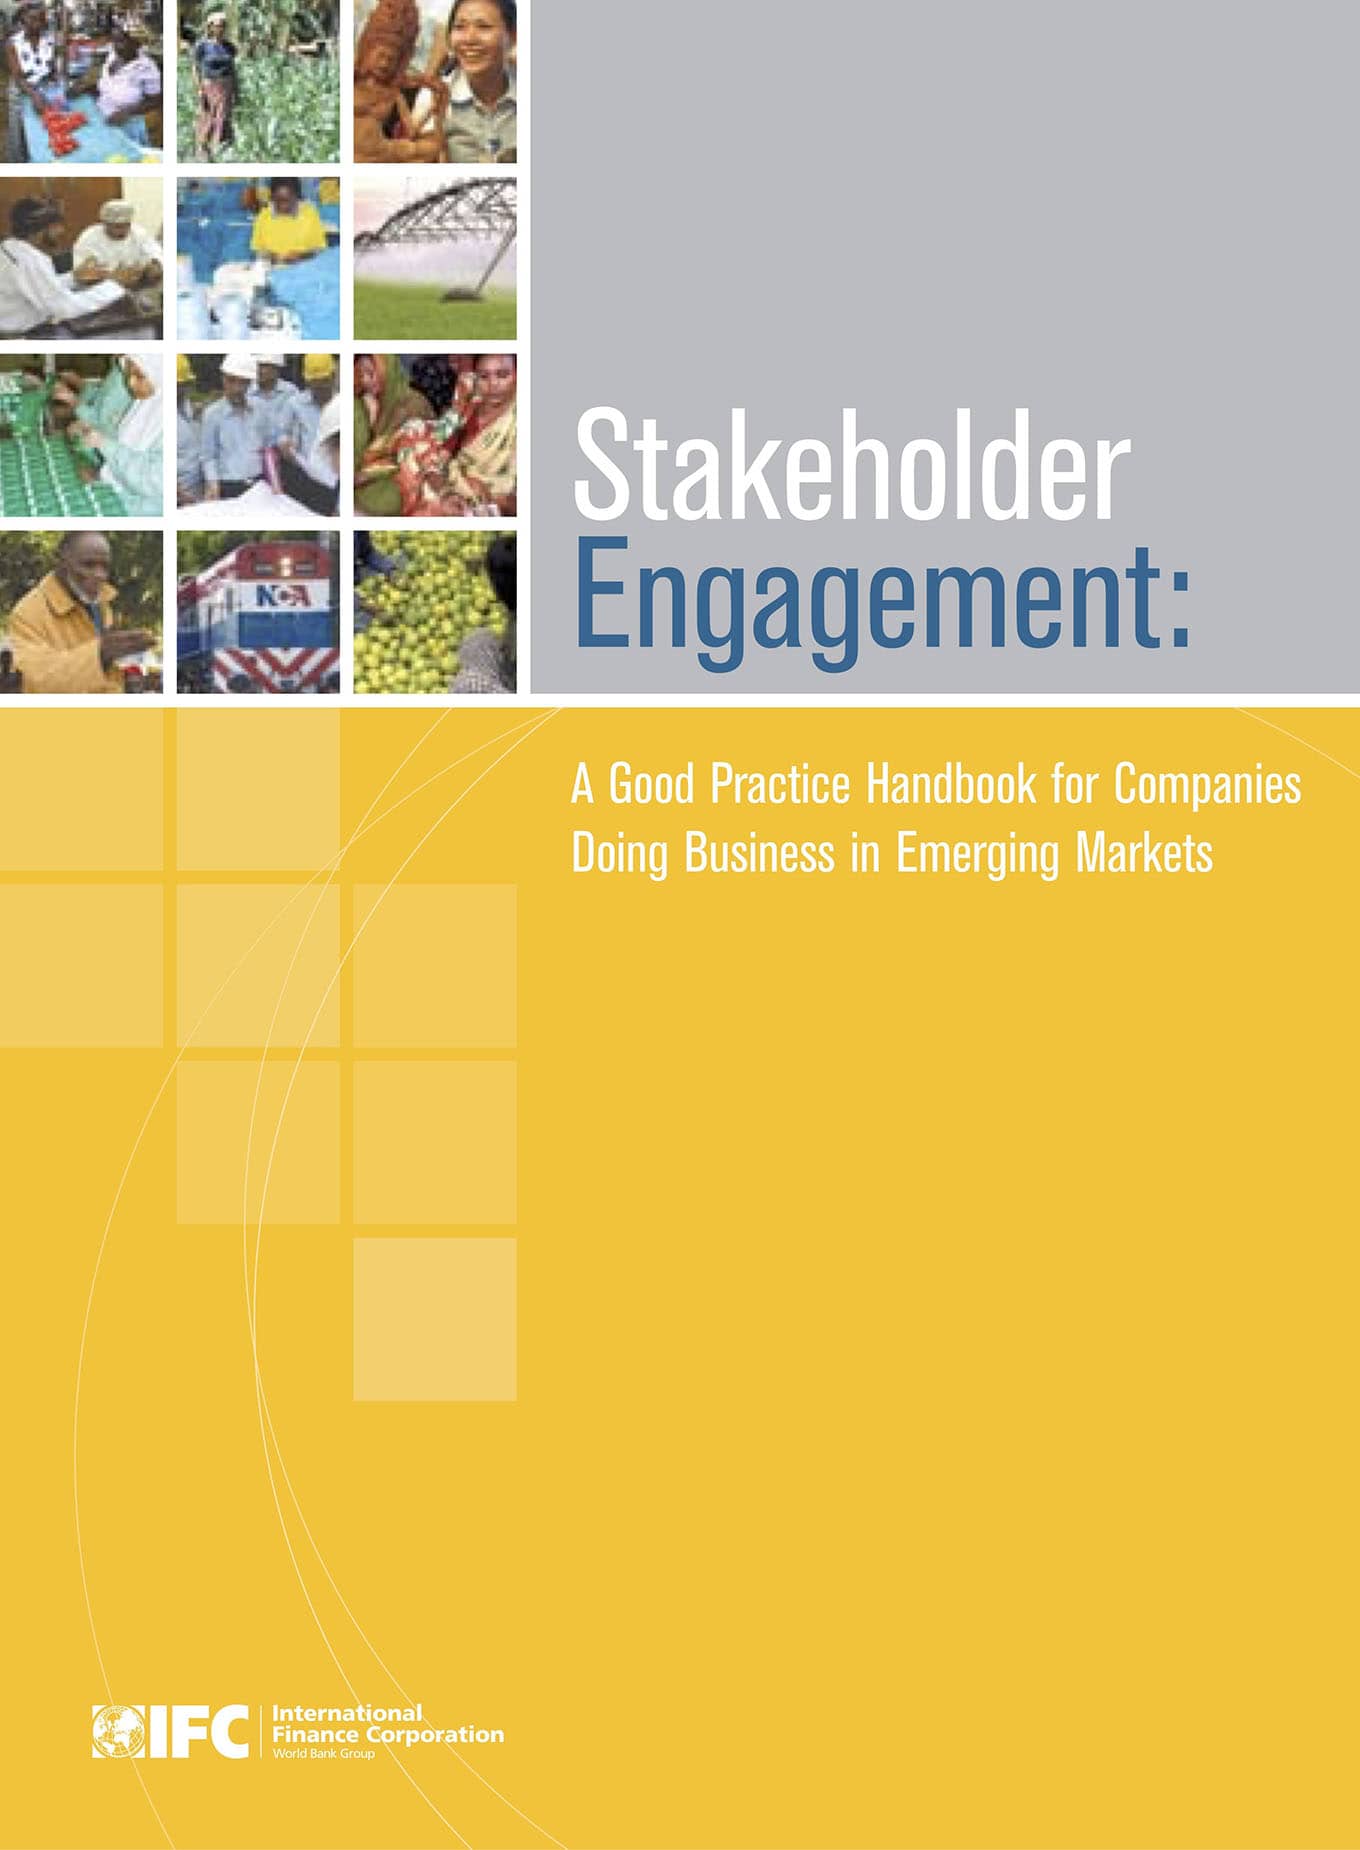 Stakeholder Engagement: A Good Practice Handbook for Companies Doing Business in Emerging Markets (IFC, 2007)